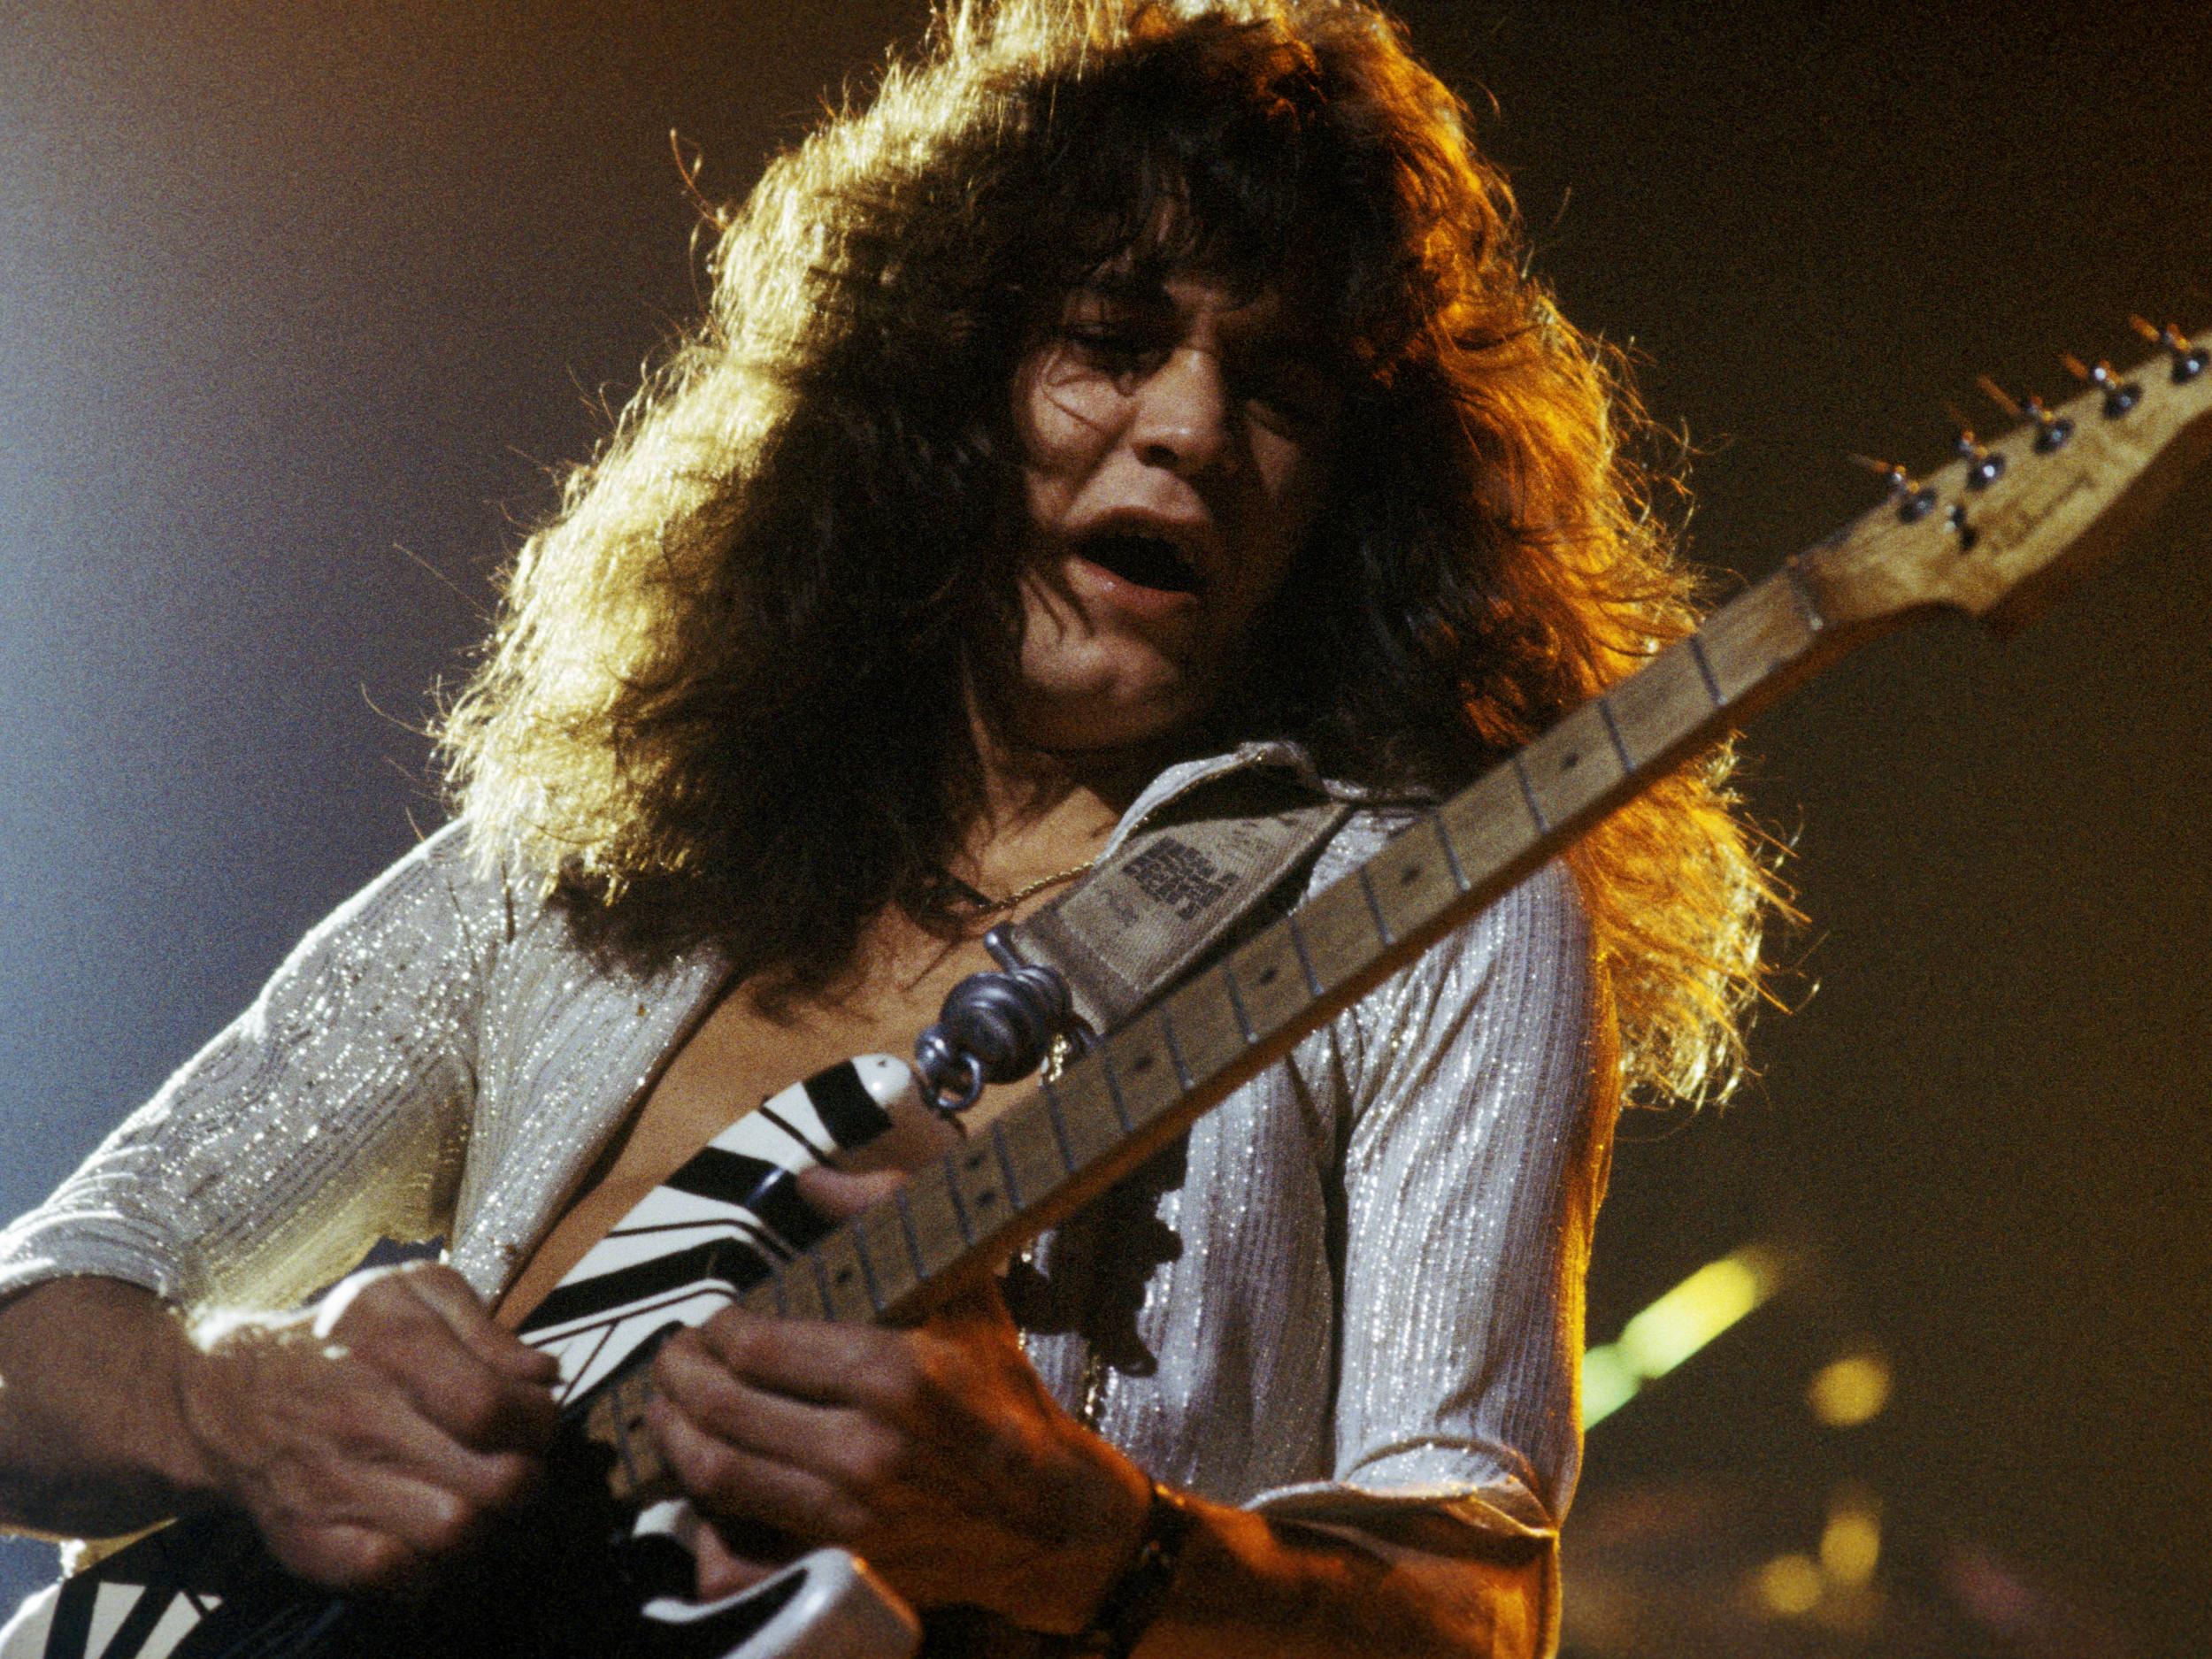 Eddie Van Halen remains one of the most influential and innovative guitarists of his generation (Getty)